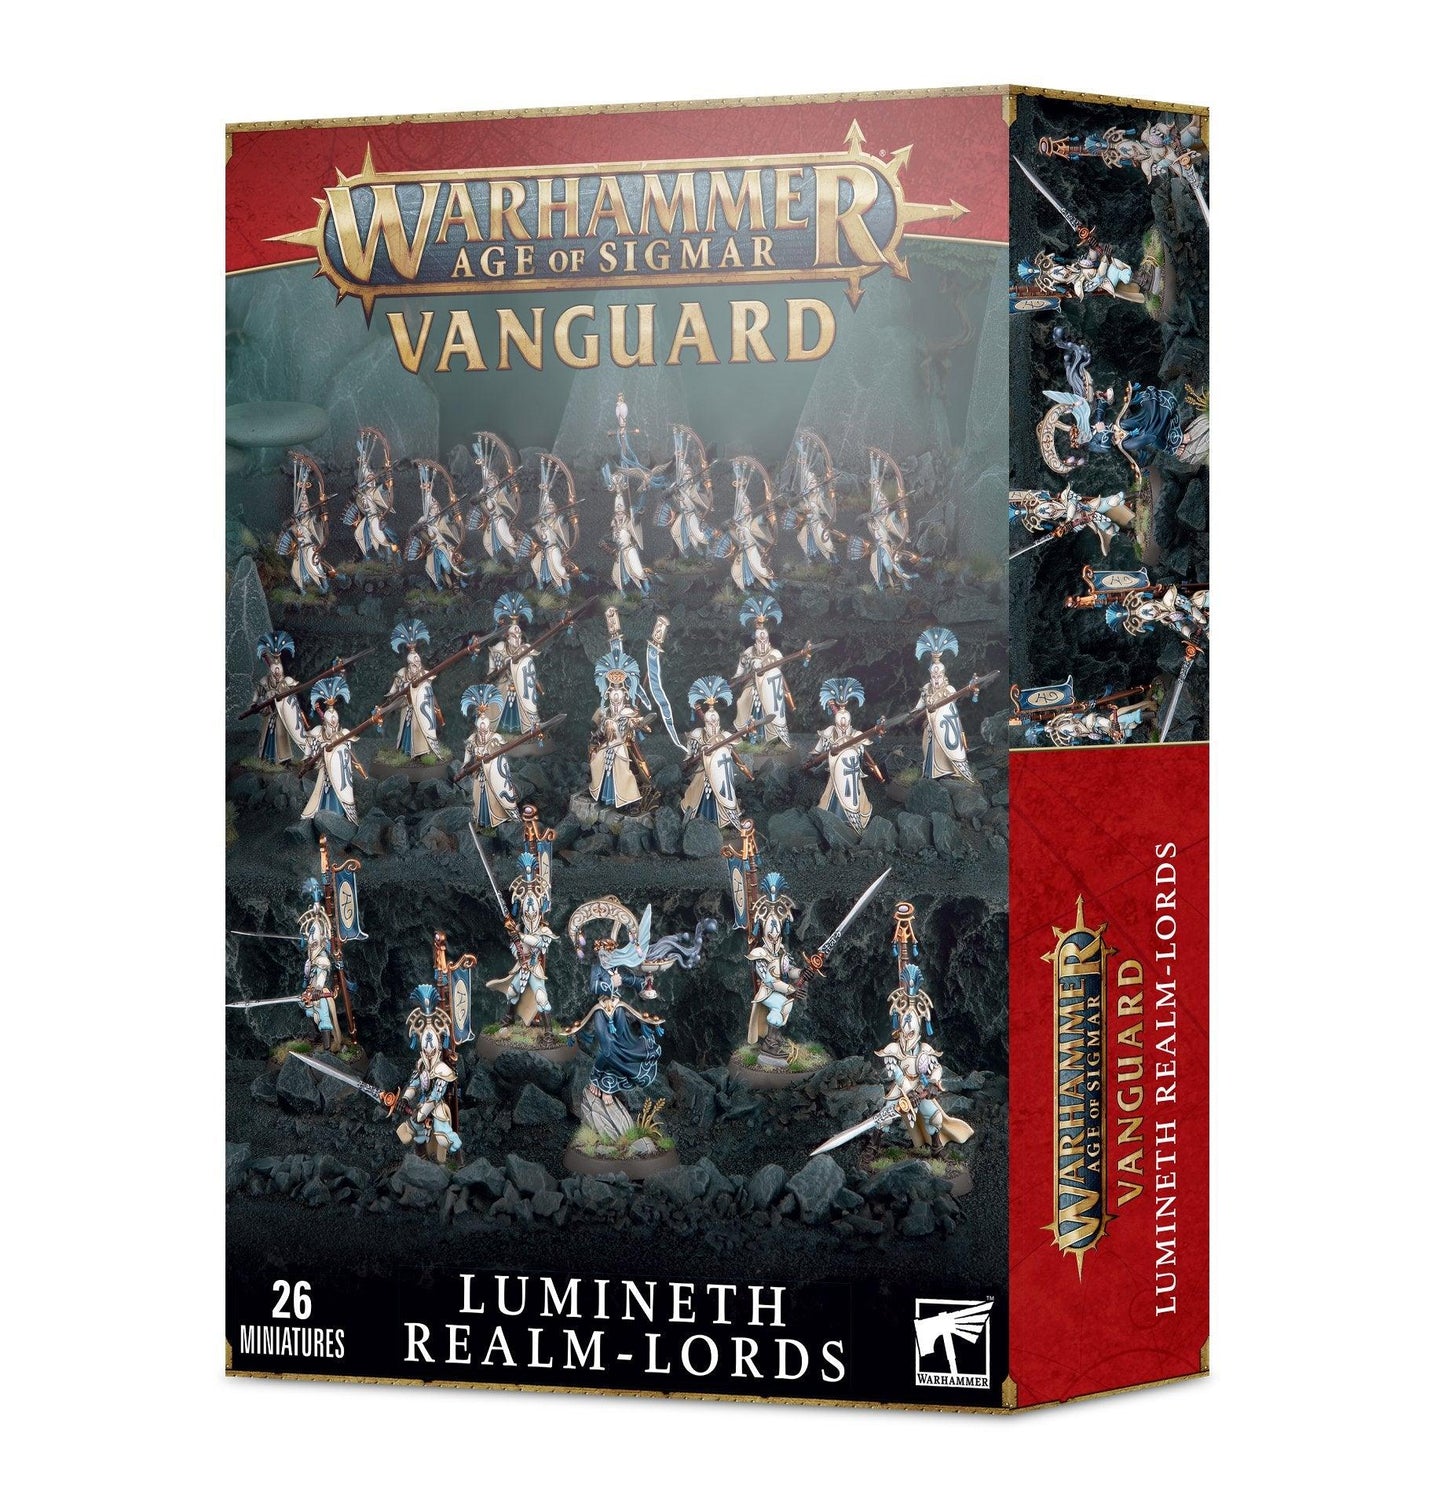 VANGUARD: LUMINETH REALM-LORDS - ZZGames.dk